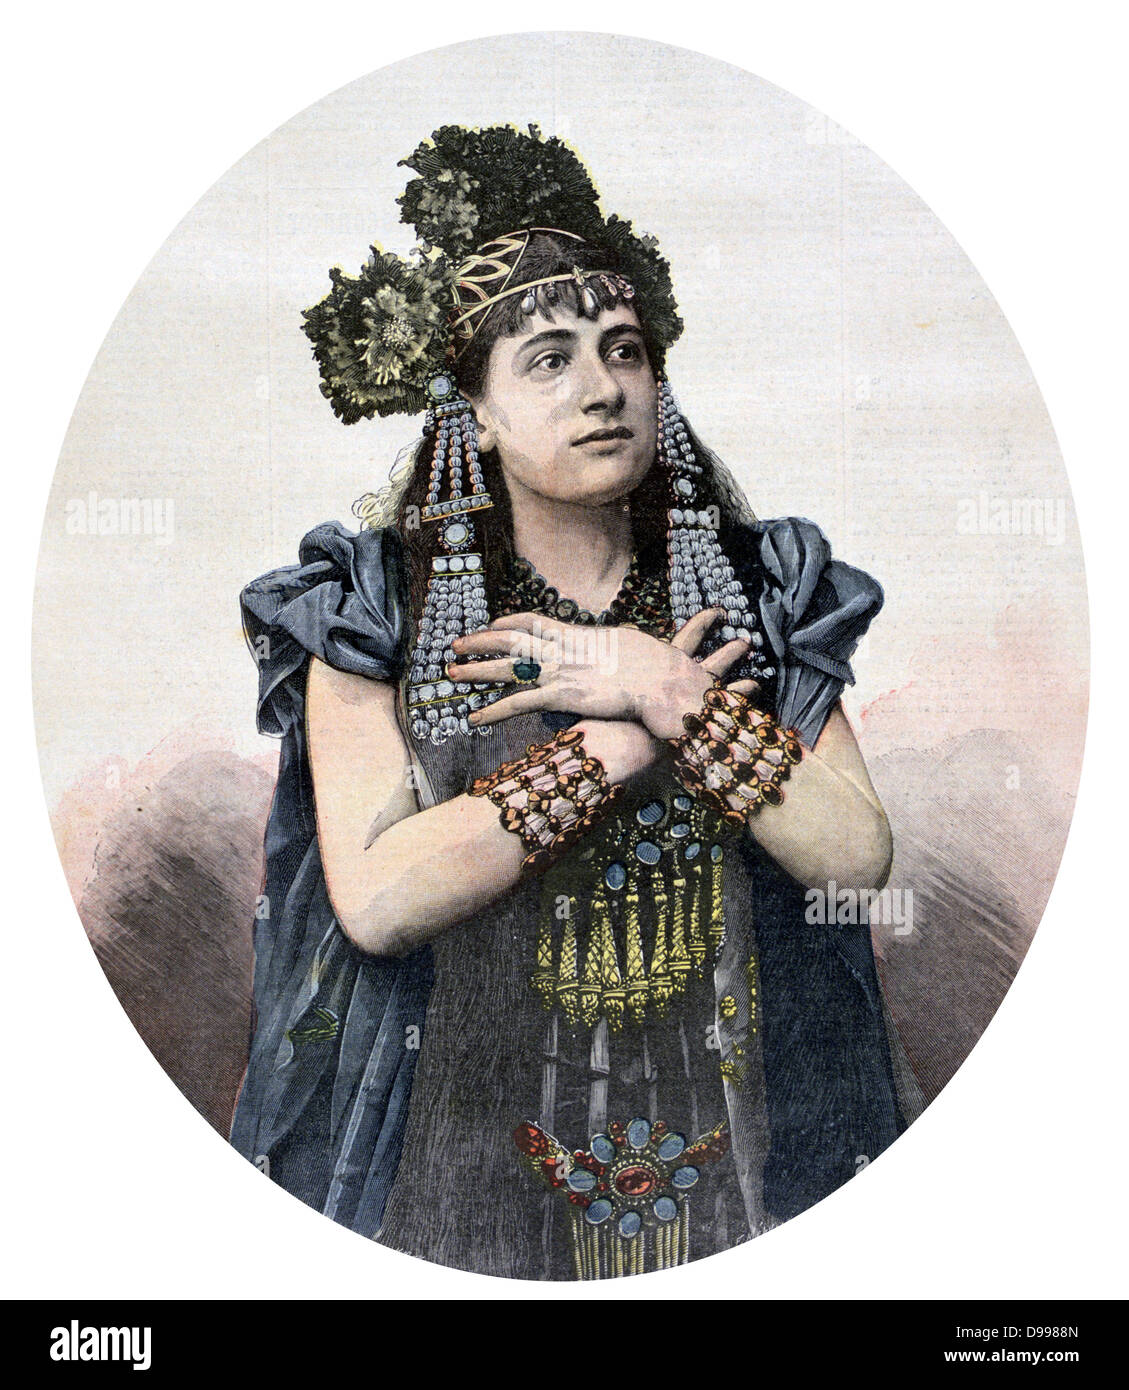 Lucienne Breval (1869-1935) Swiss singer, in the title role  of 'Salammbo' by Ernest Reyer (1823-1909) at the Paris Opera.  From 'Le Petit Journal', Paris, 13 August 1892. France, Music Stock Photo